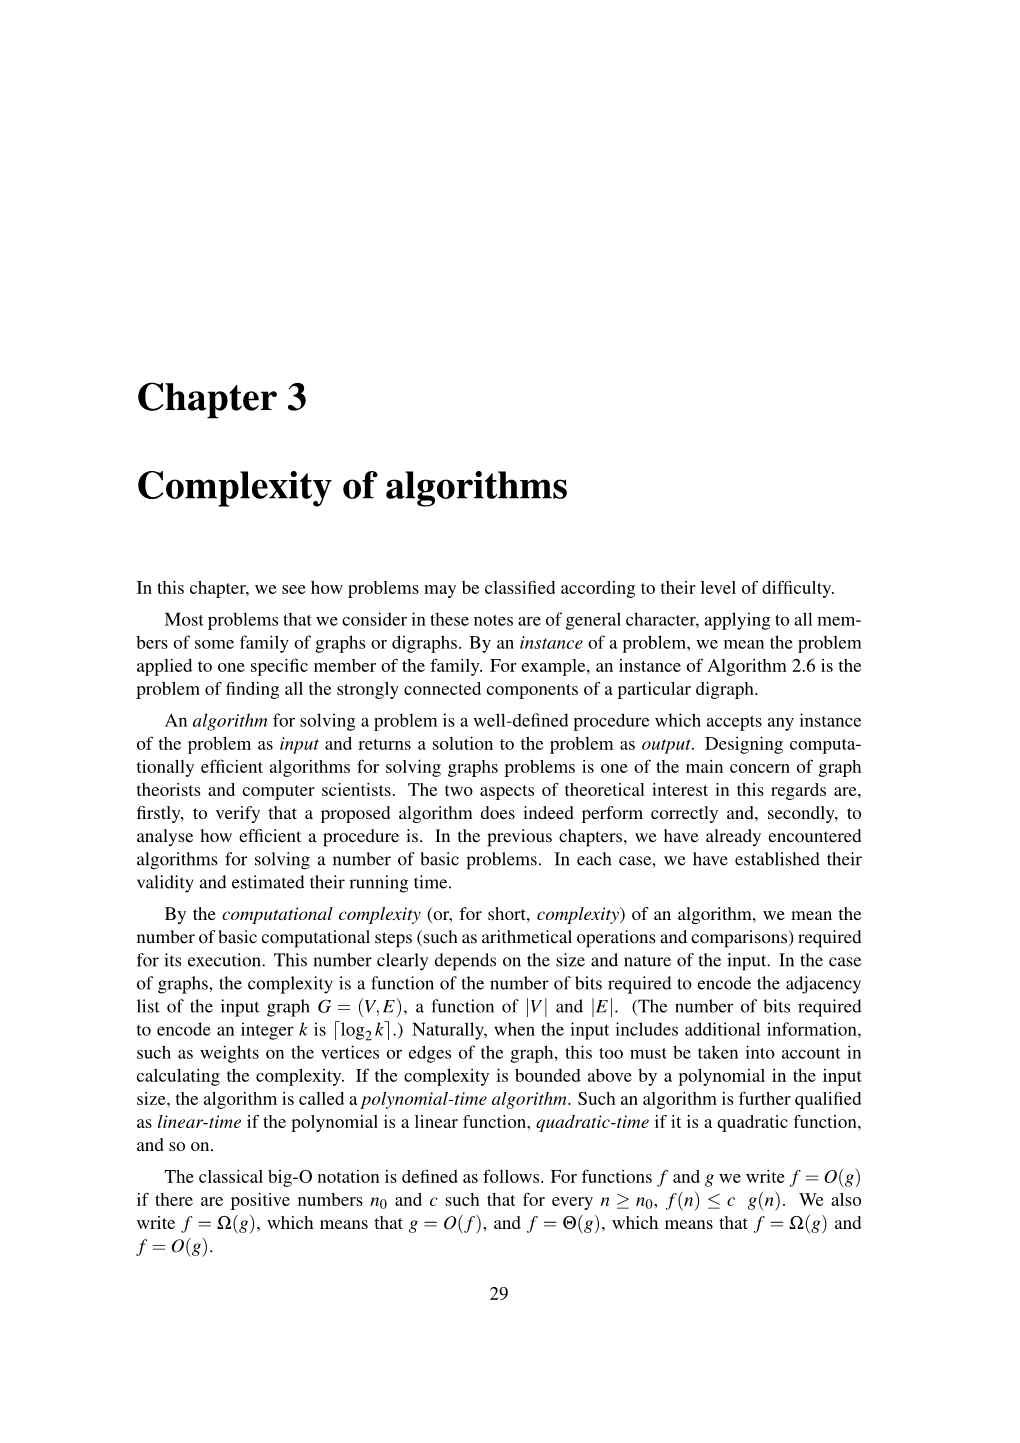 Chapter 3 Complexity of Algorithms